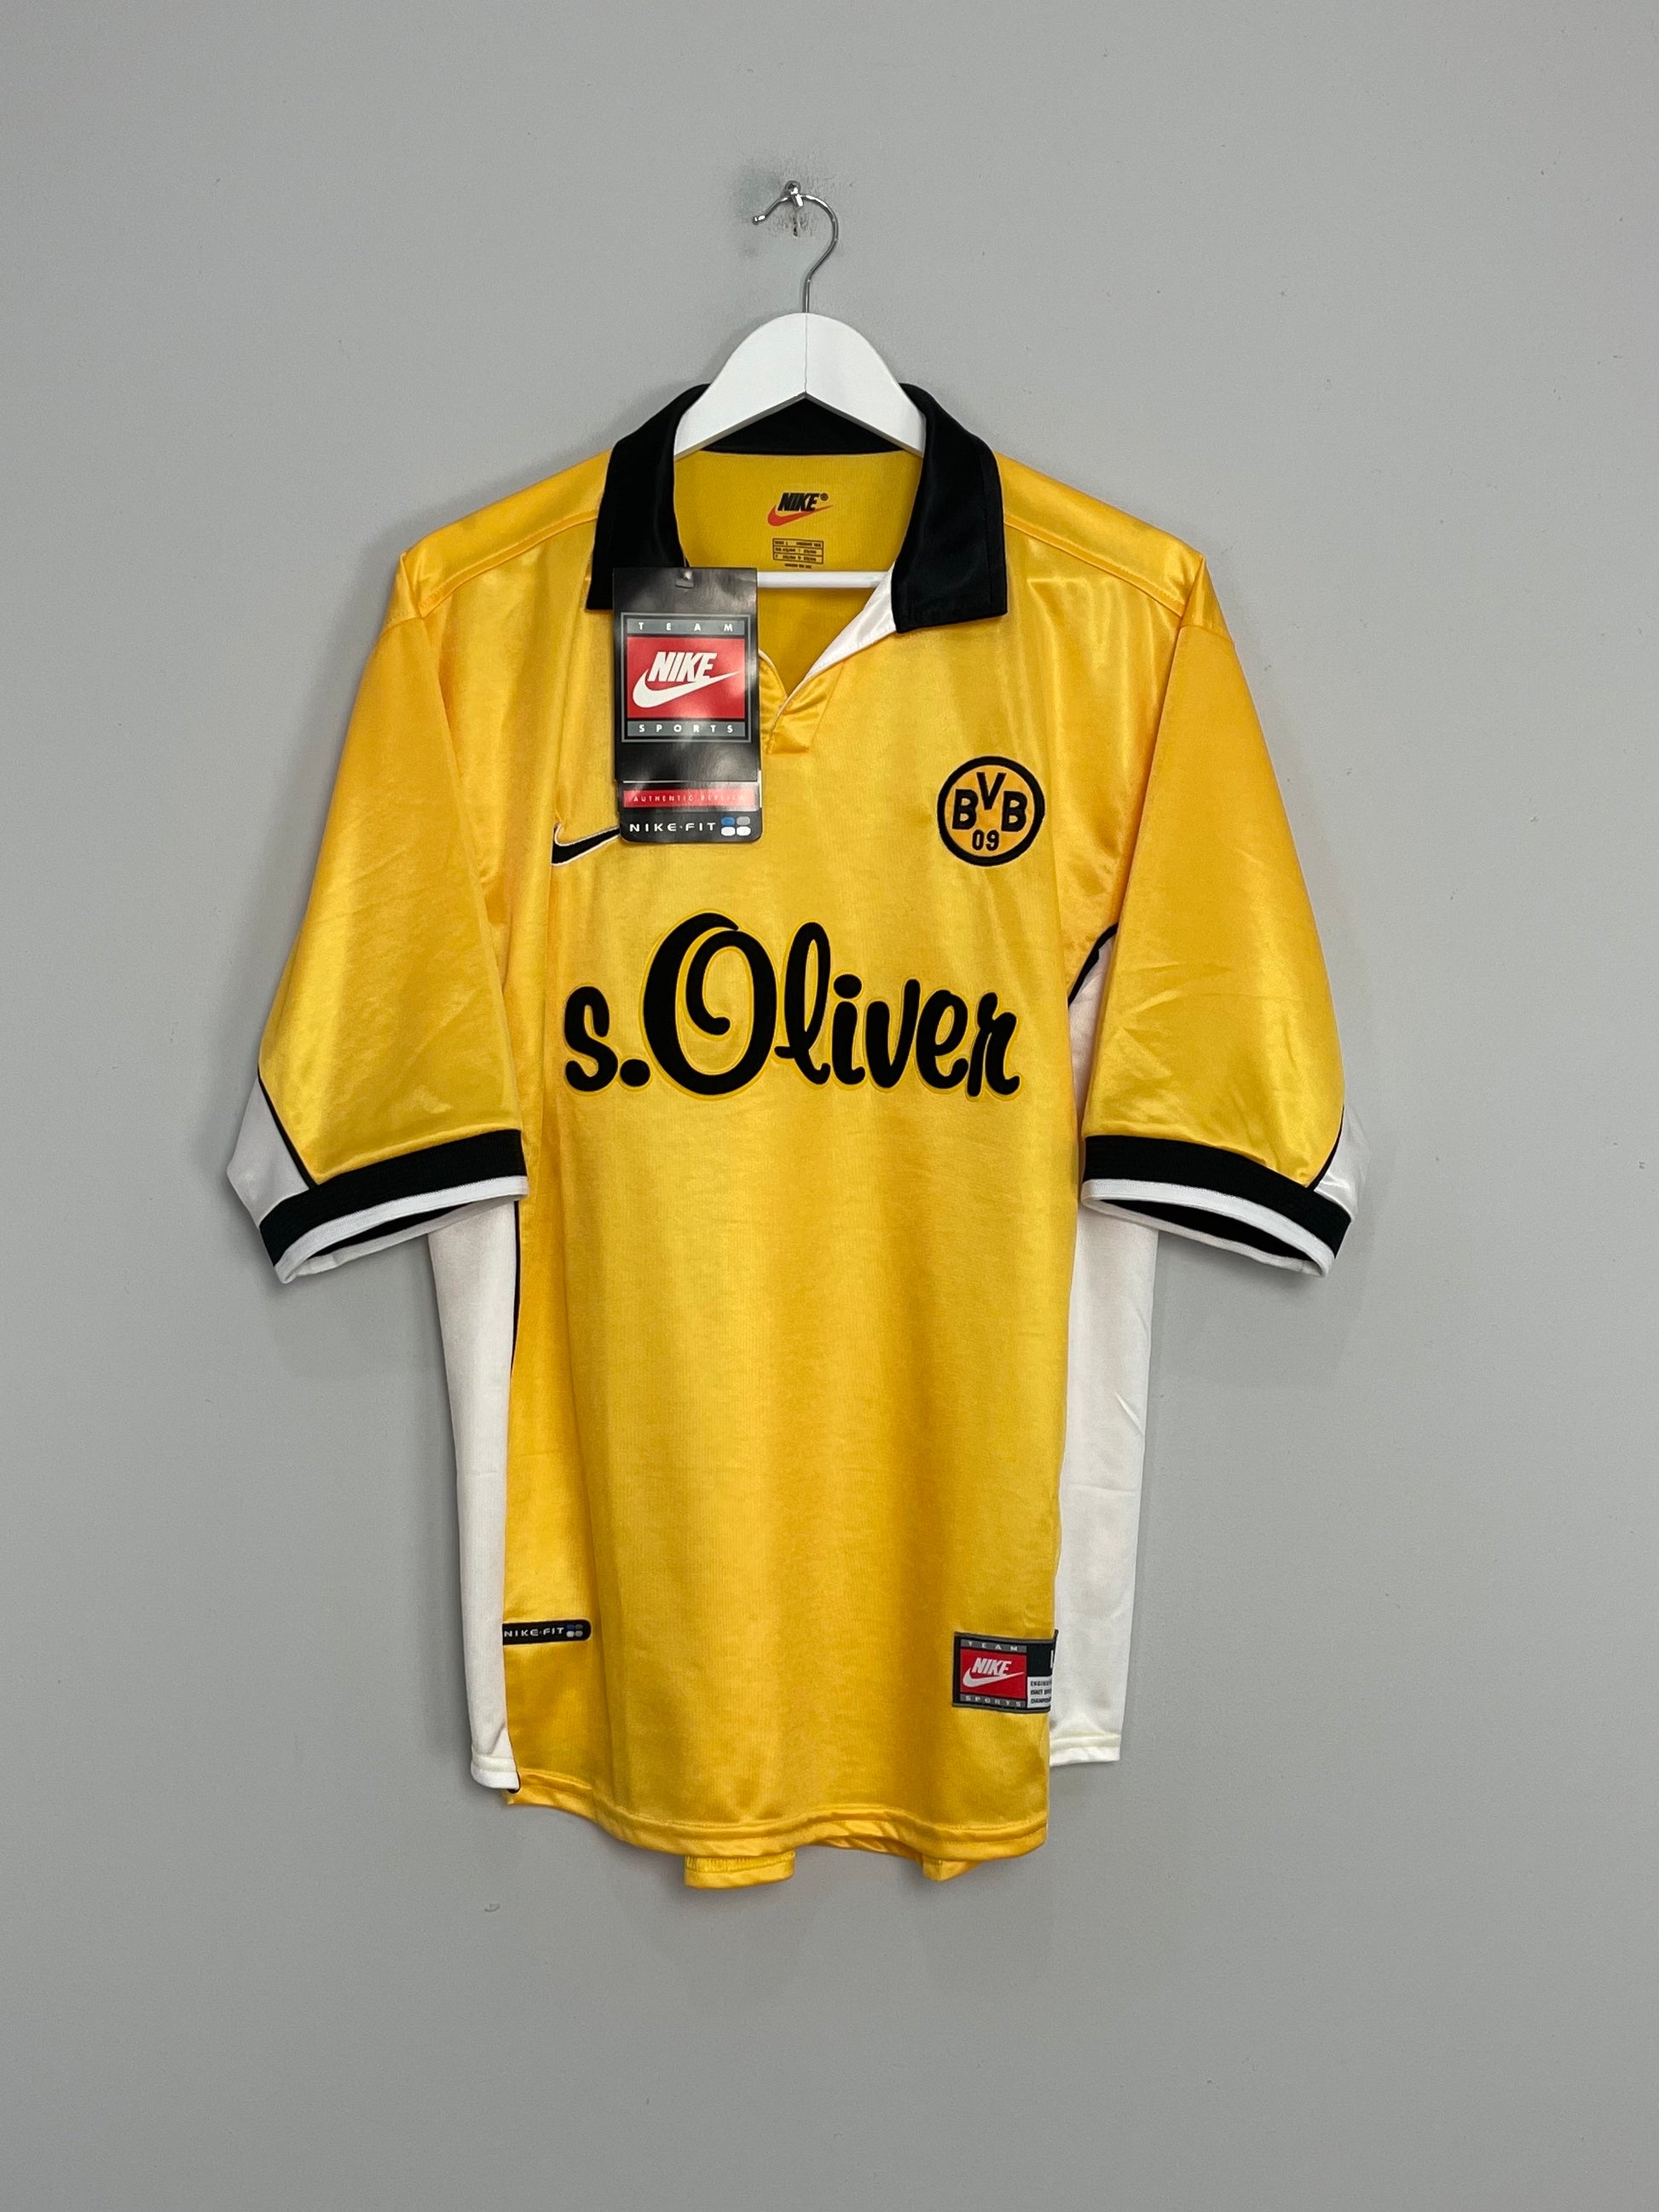 Image of the Dortmund shirt from the 1998/99 season